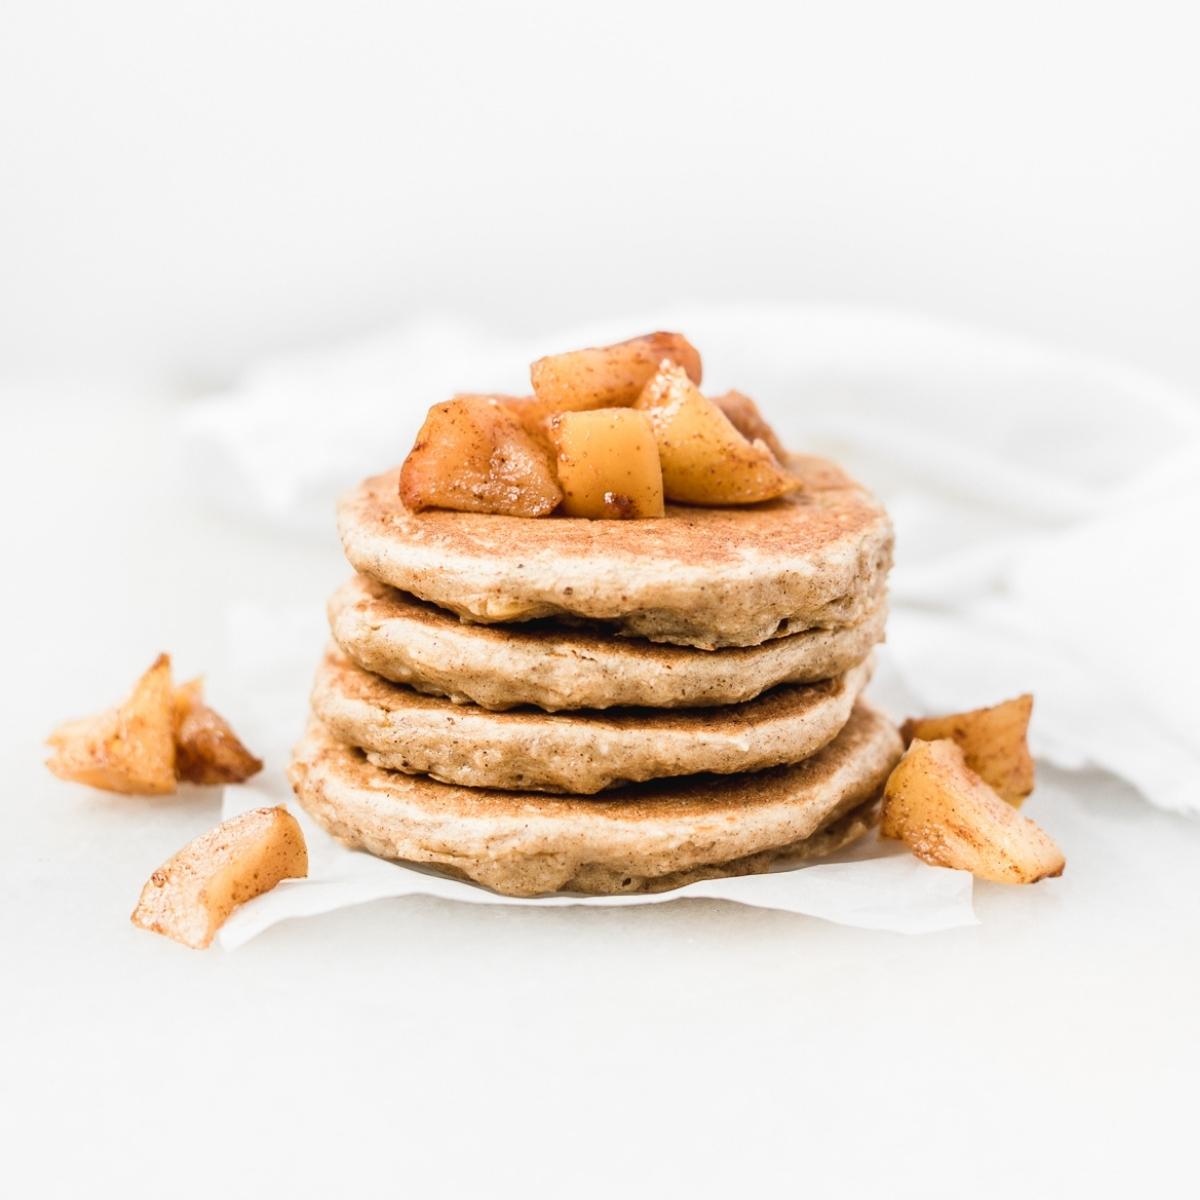 4 baby apple pancakes stacked on a piece of parchment with cooked cinnamon apple pieces on top.